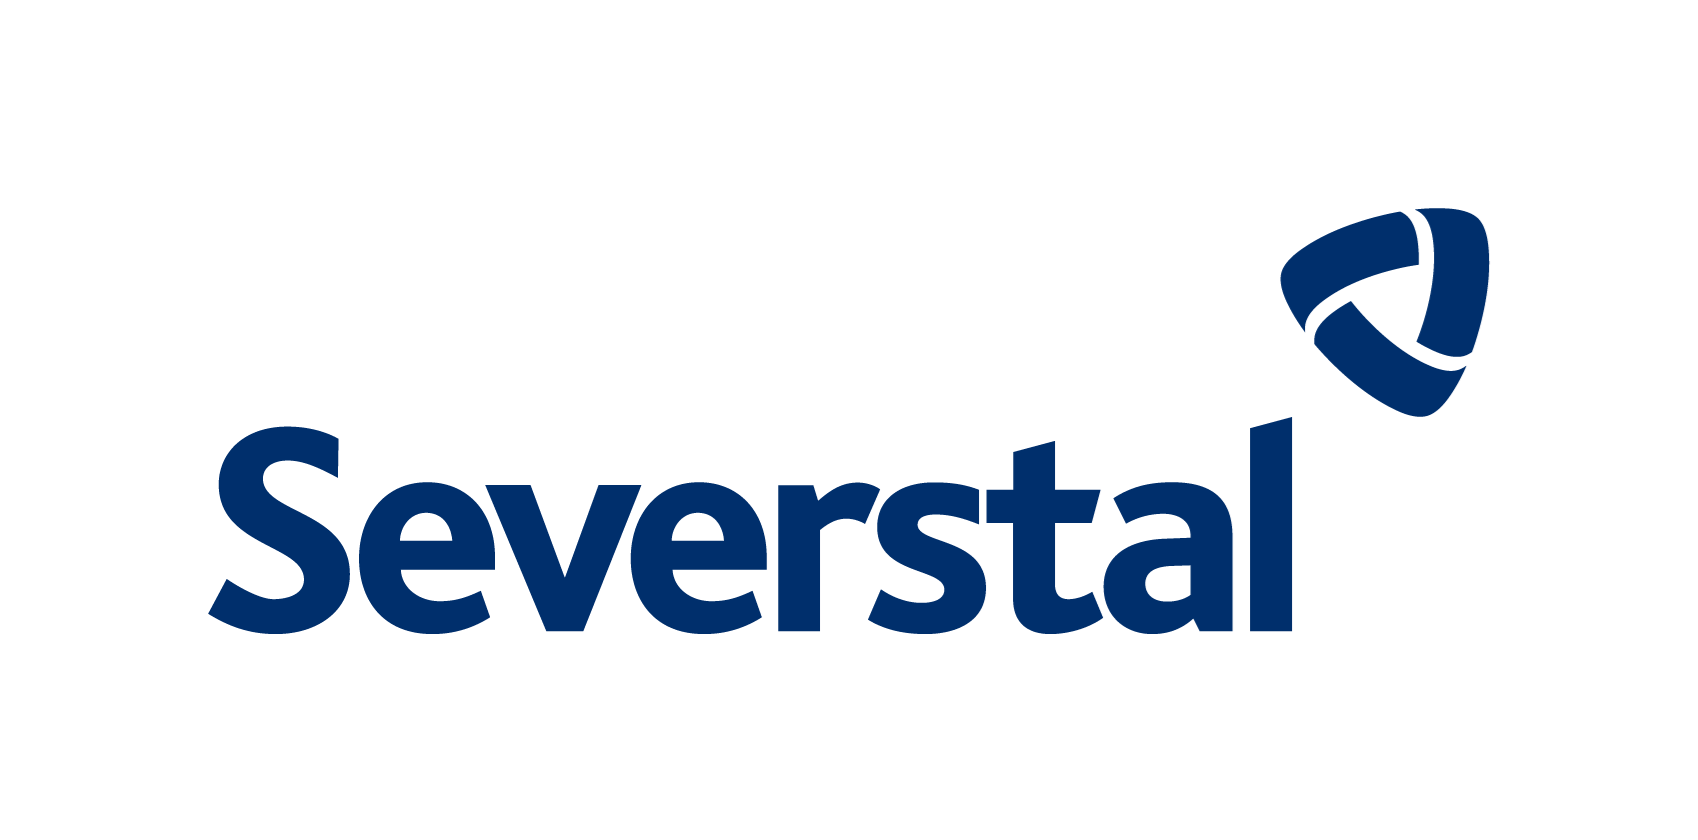 Severstal expands strategically by acquiring A Group's distribution business